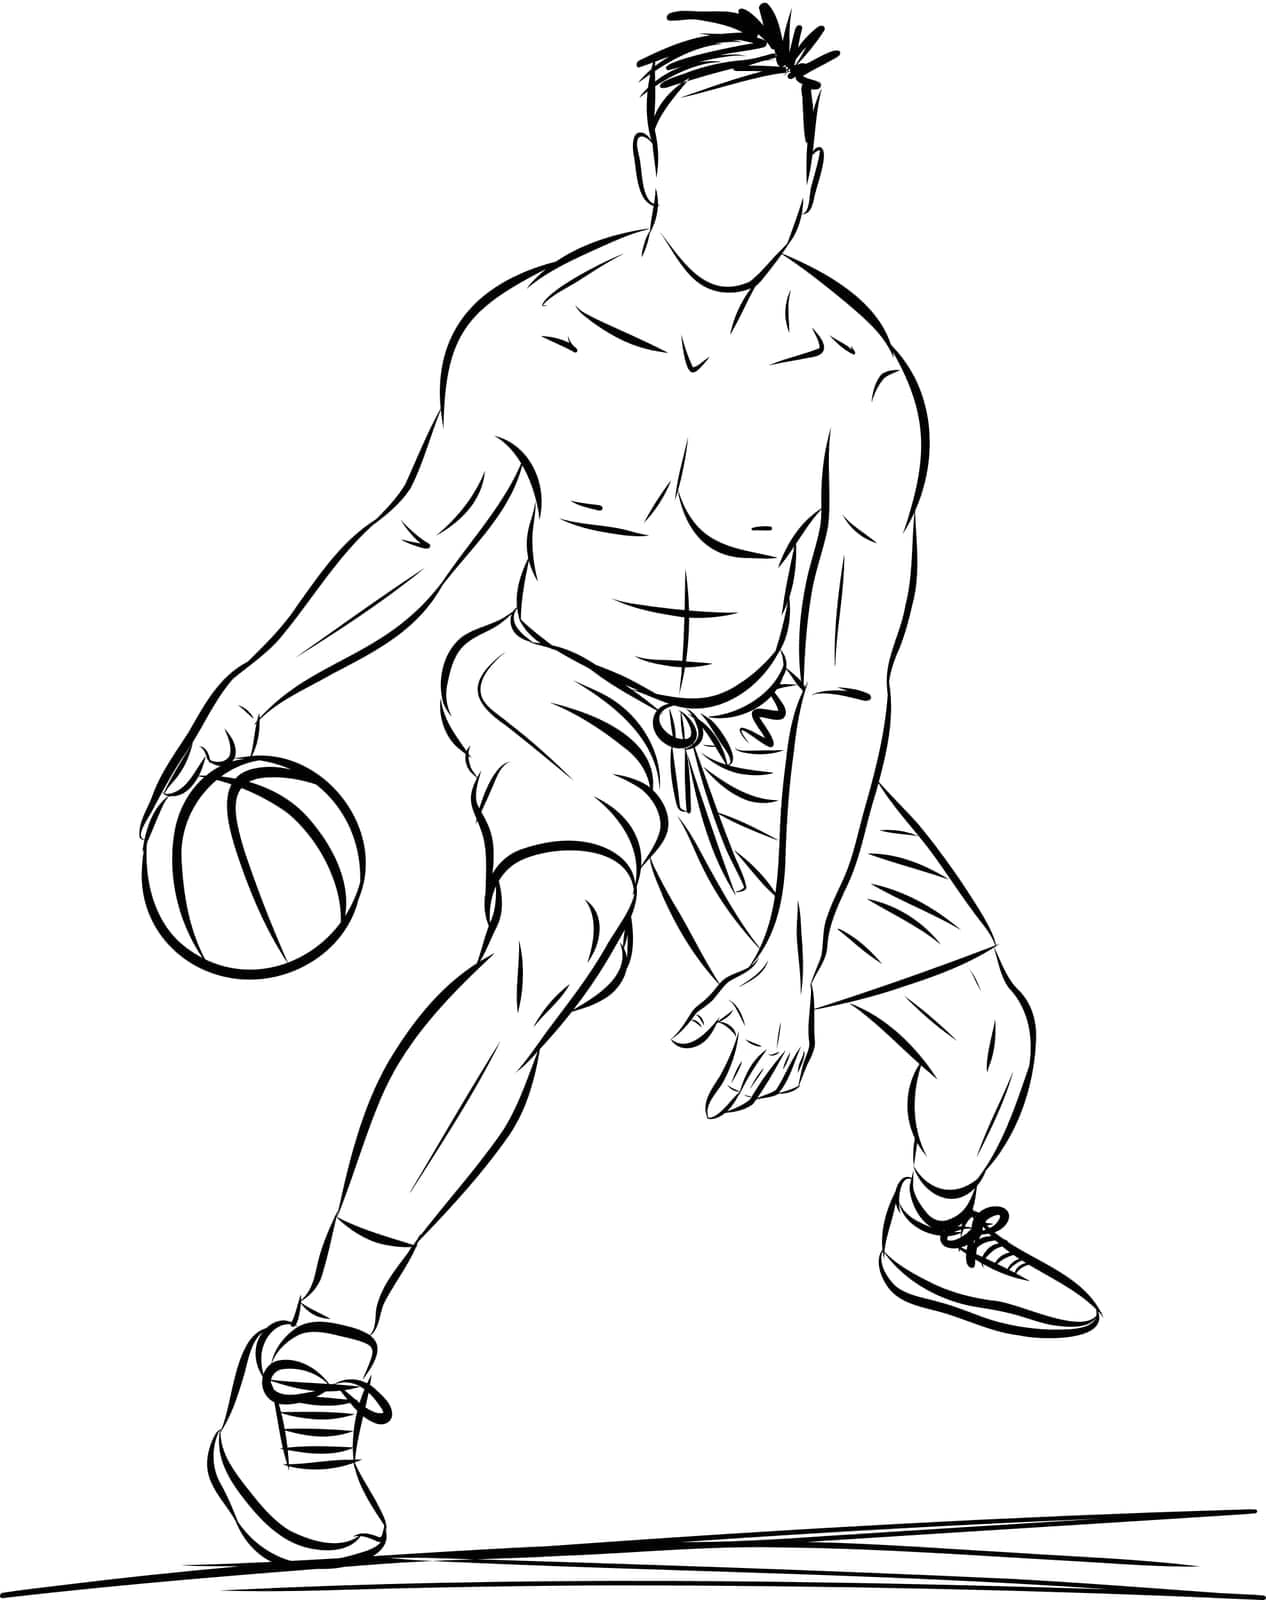 Basketball player with a ball sketch illustration